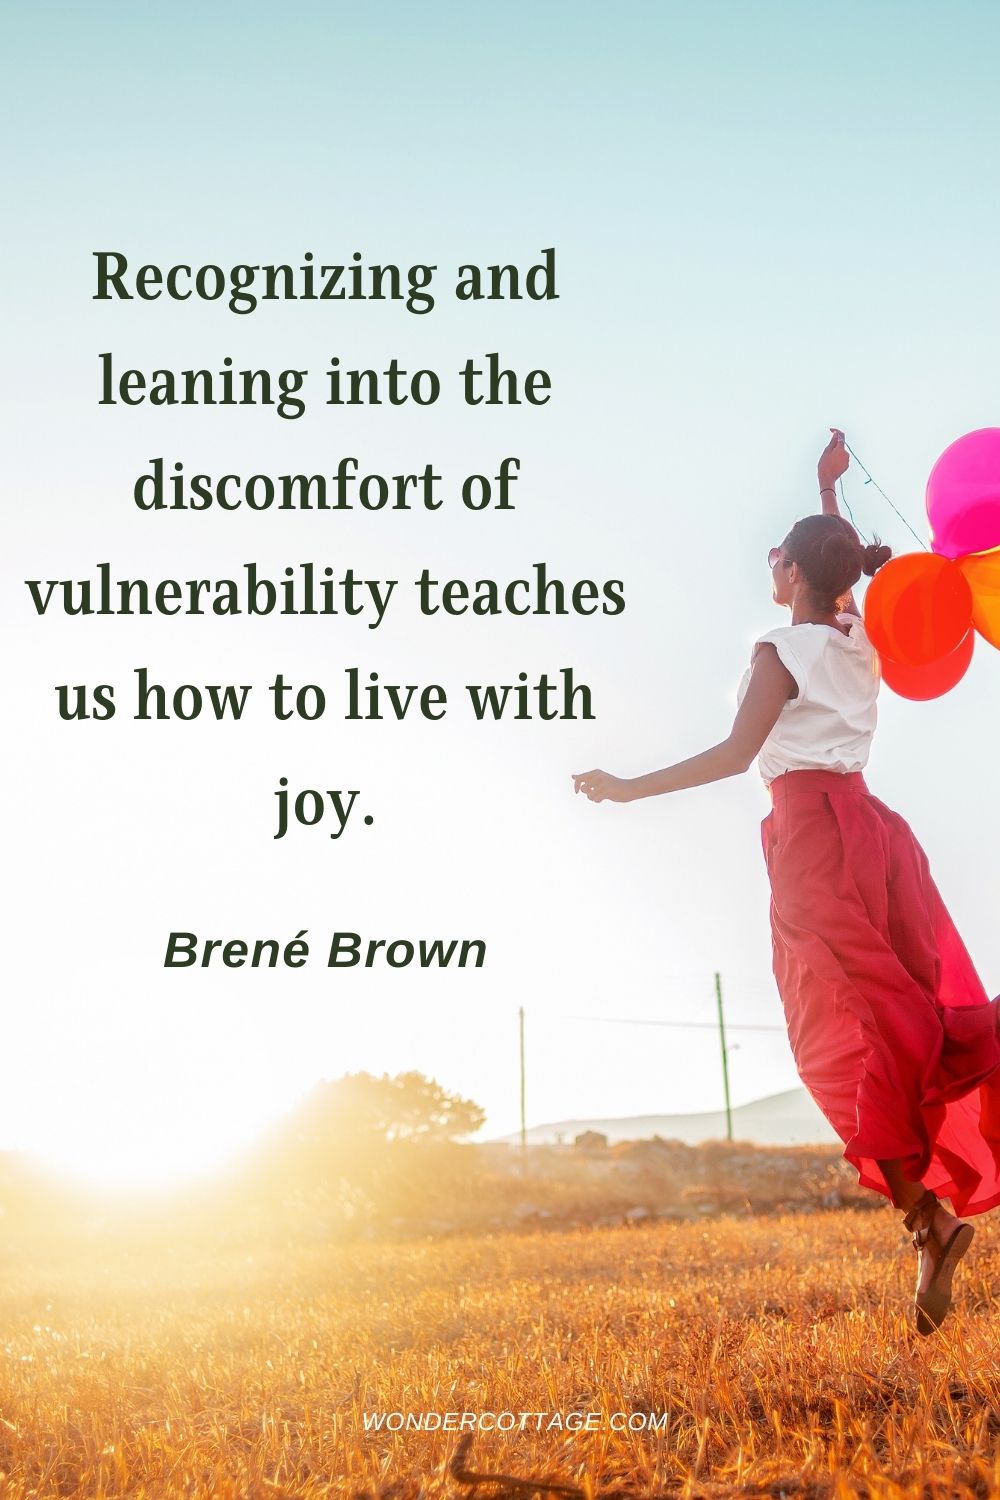 Recognizing and leaning into the discomfort of vulnerability teaches us how to live with joy. Brené Brown